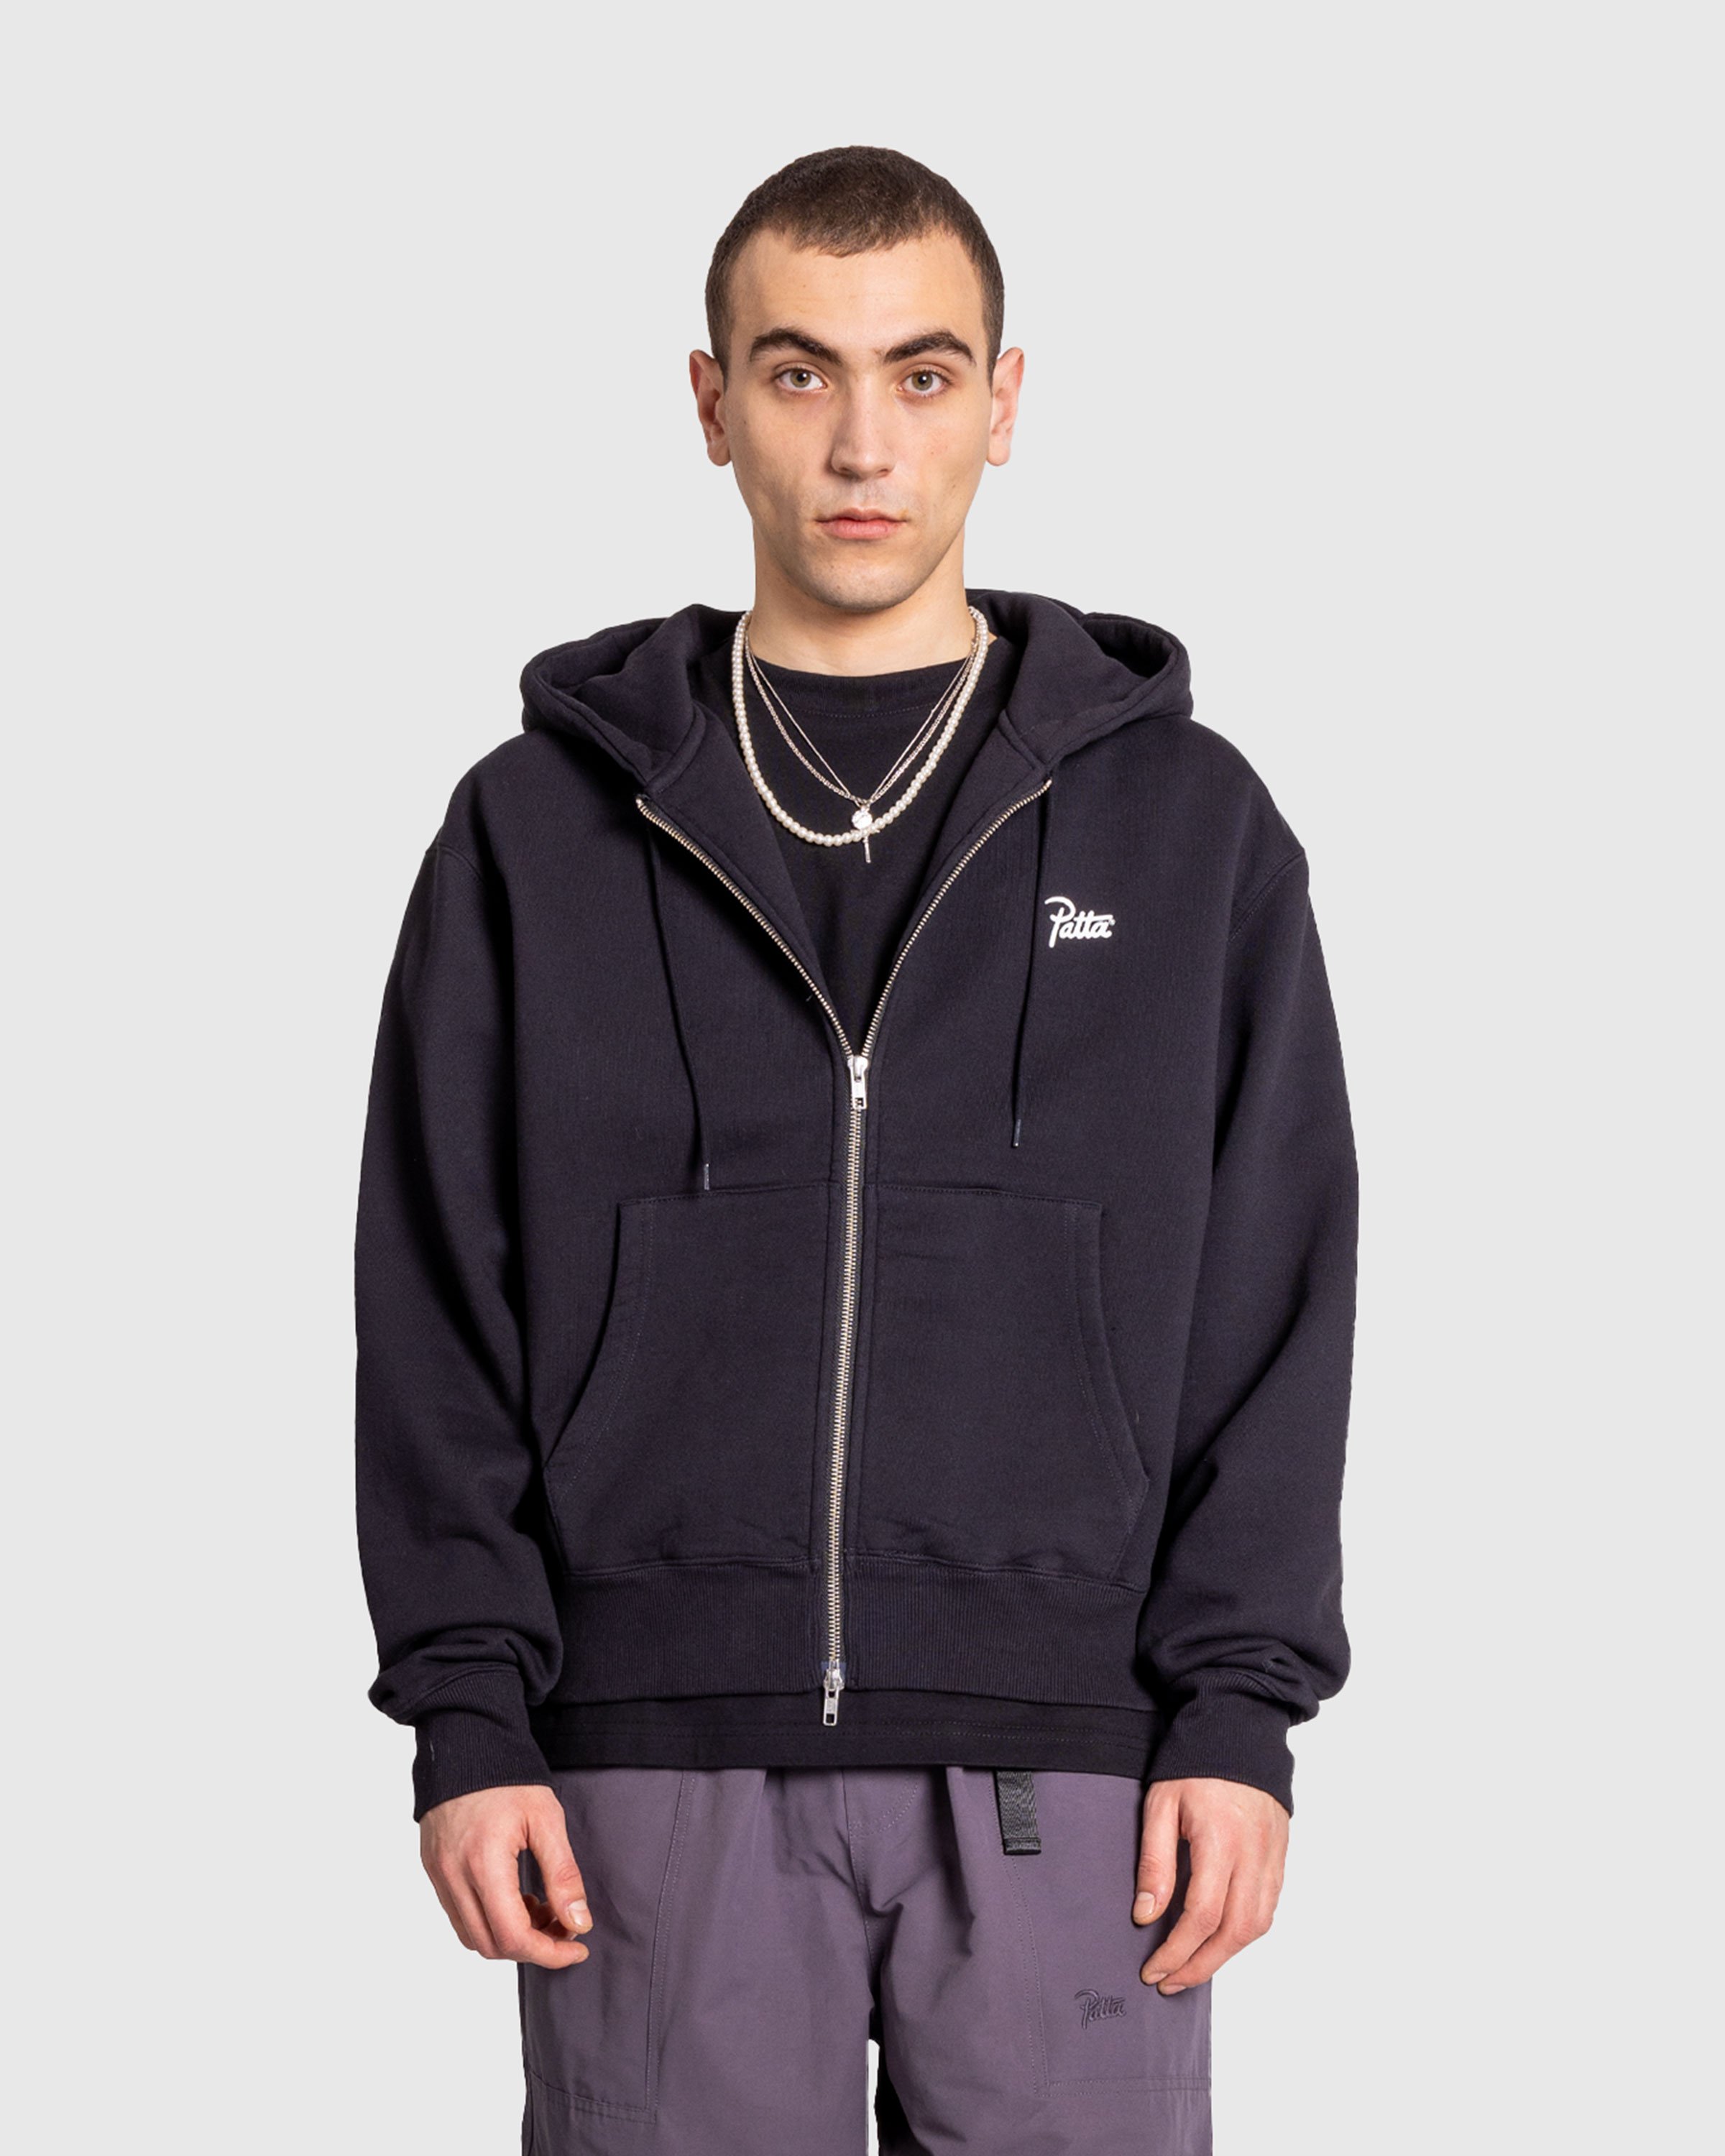 Patta - Classic Zip Up Hooded Sweater Black - Clothing - Black - Image 2